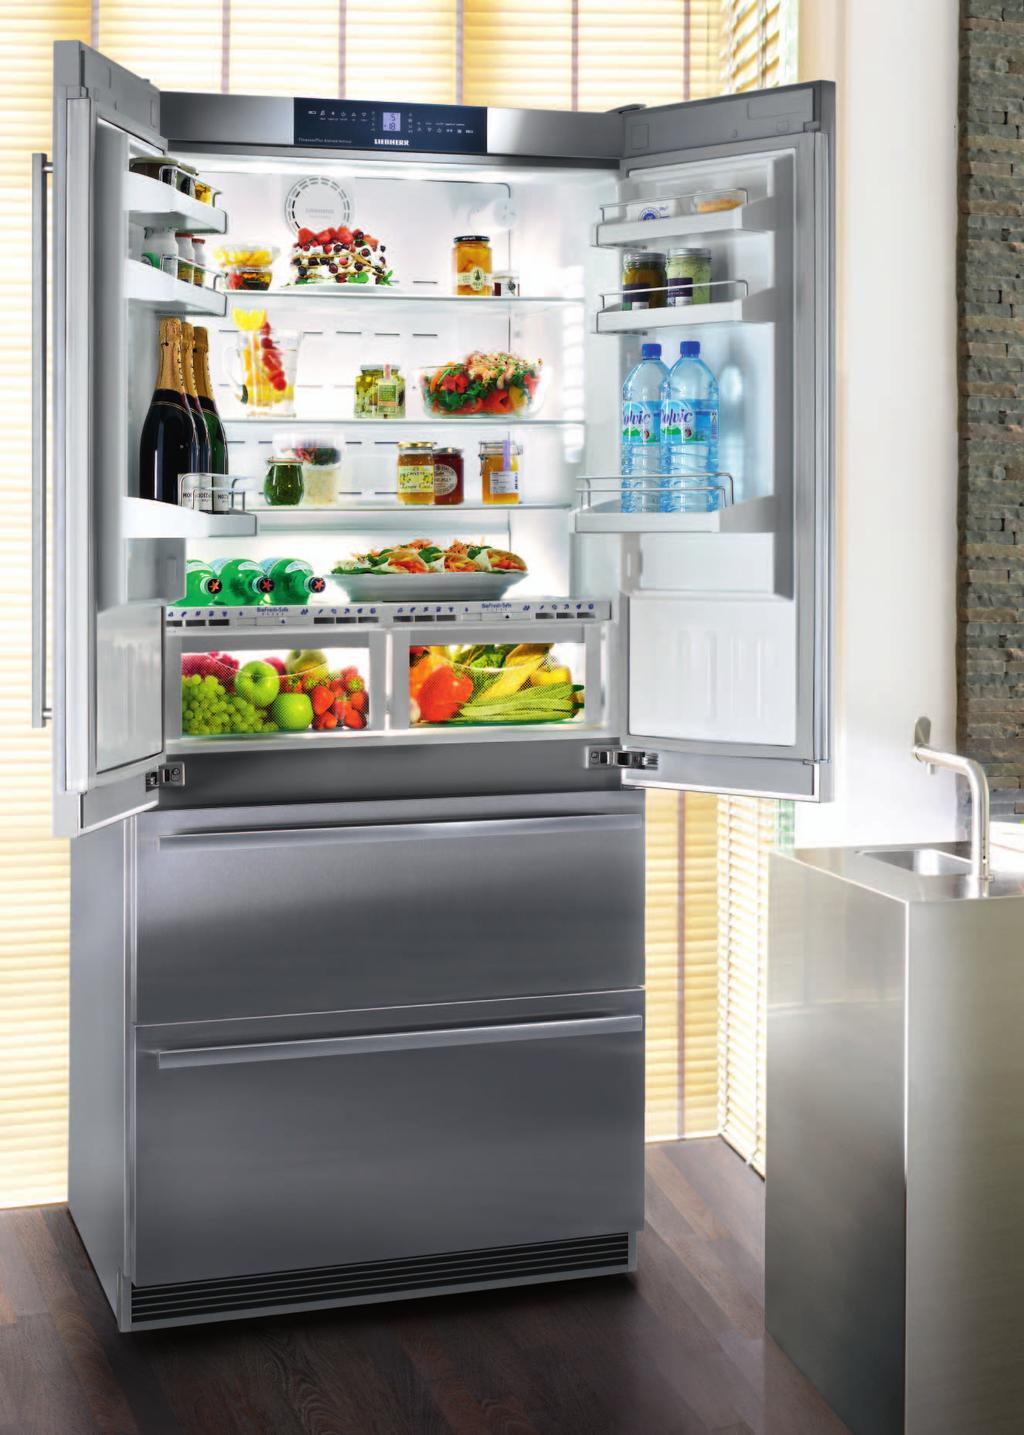 CBNes 656 Frenchdoor combination fridge-freezer with BioFresh and NoFrost The Food Storage Centre CBNes 656 with its elegant Frenchdoor concept is a focal point in any kitchen, open or closed.